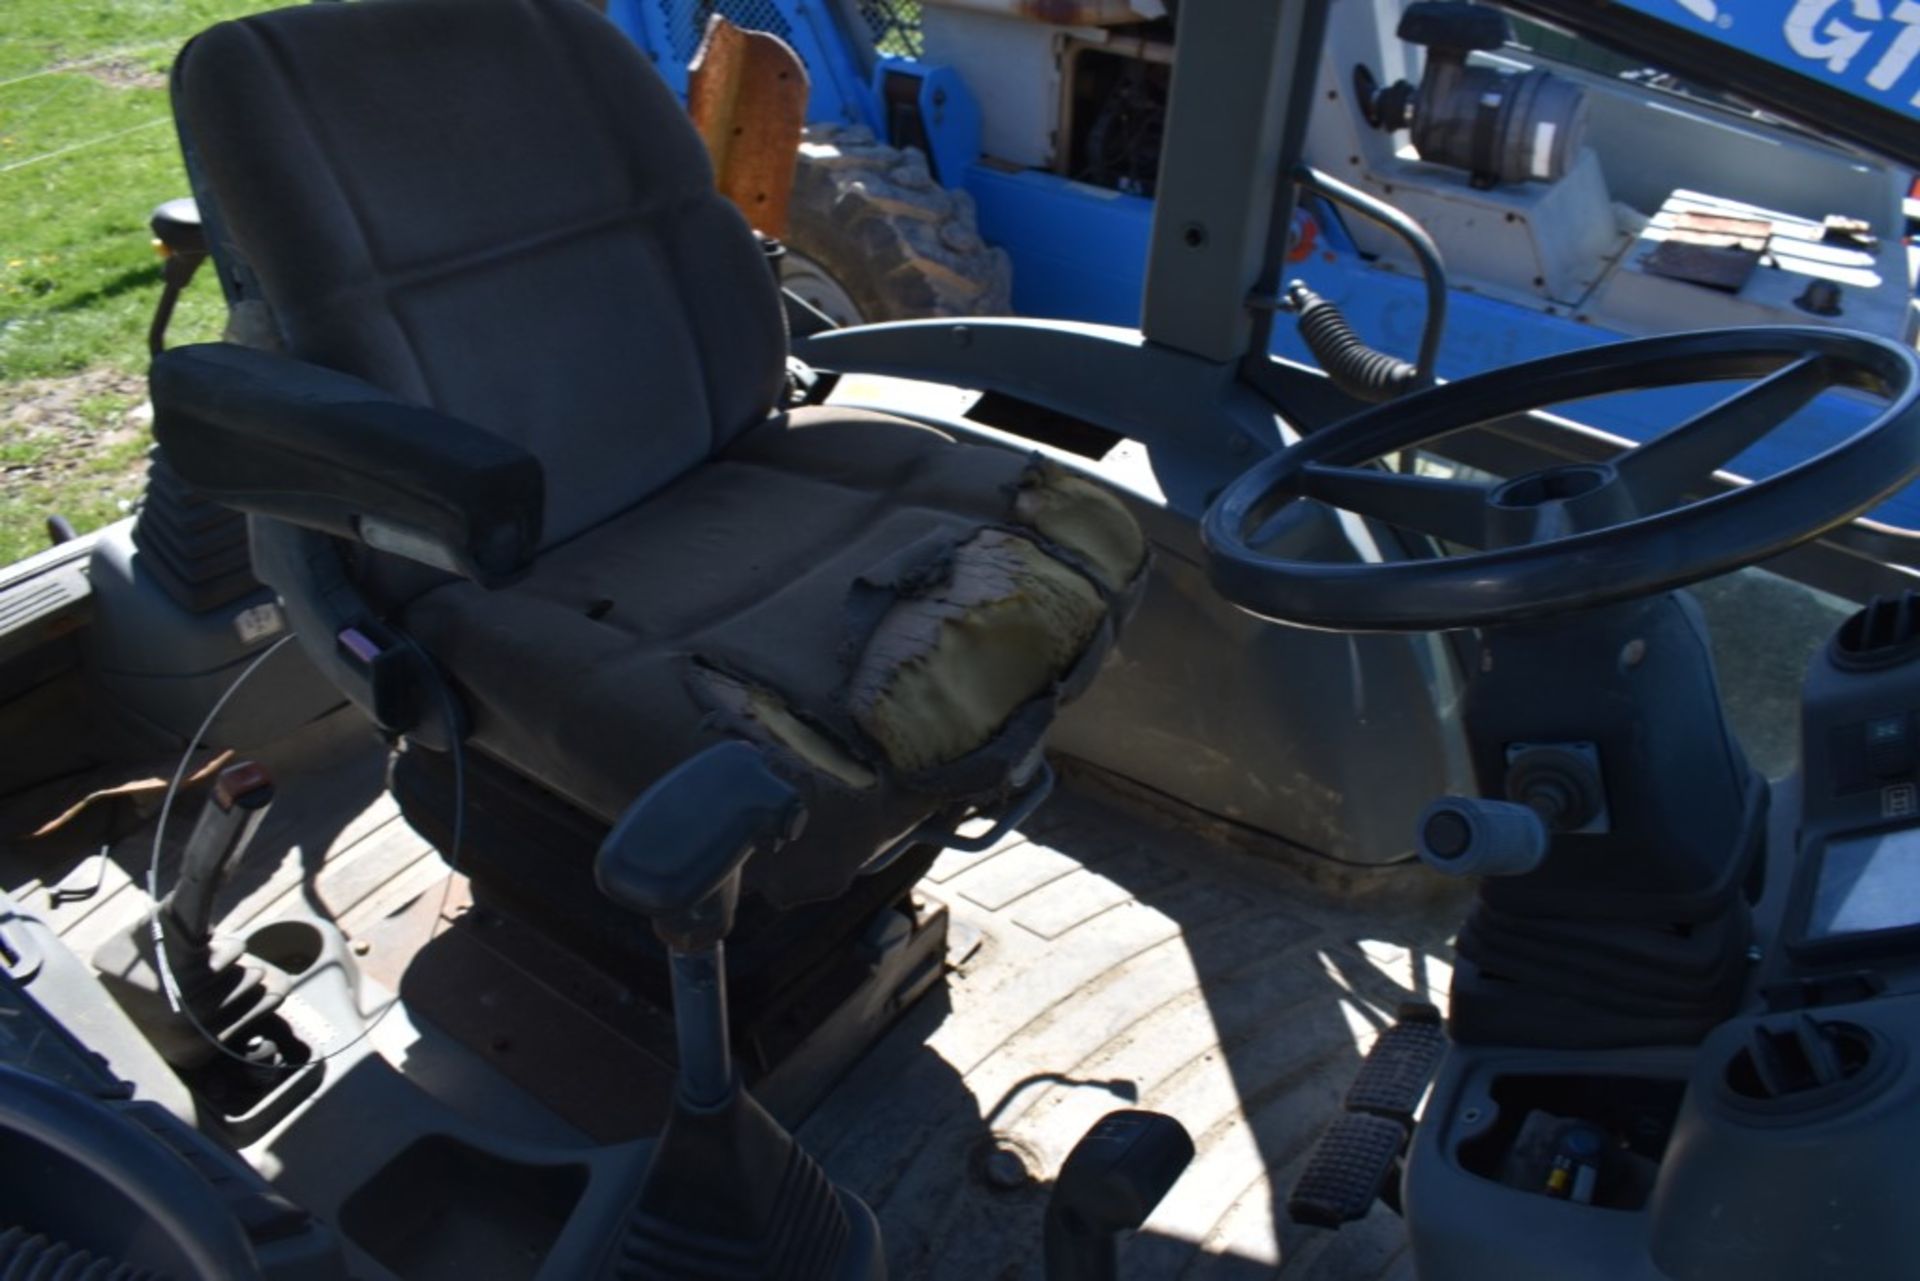 New Holland LB75B Backhoe 8052 Hours, Runs and Operates, 88" Bucket, 4WD, Outriggers, No Backhoe, - Image 20 of 24